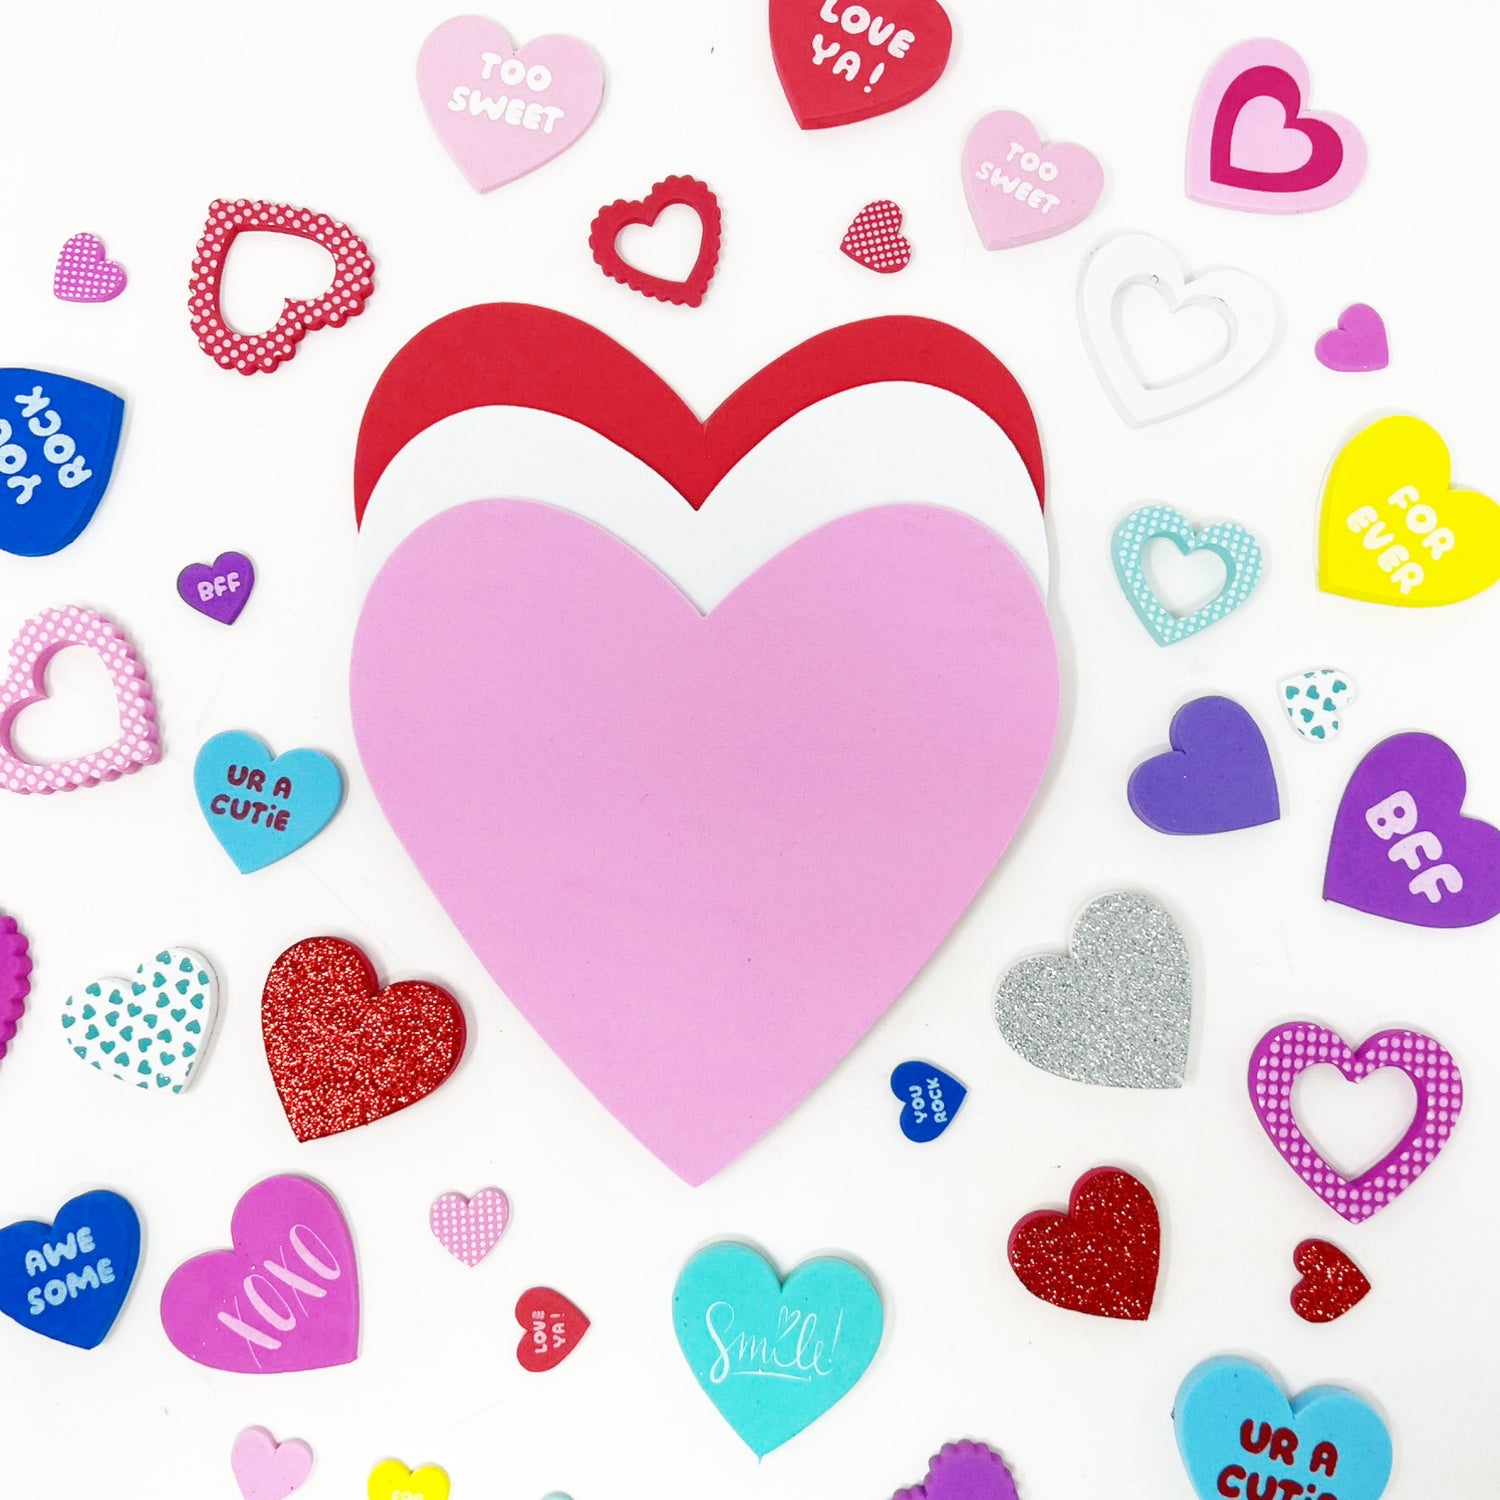 Pack of 80 Assorted Foam Hearts